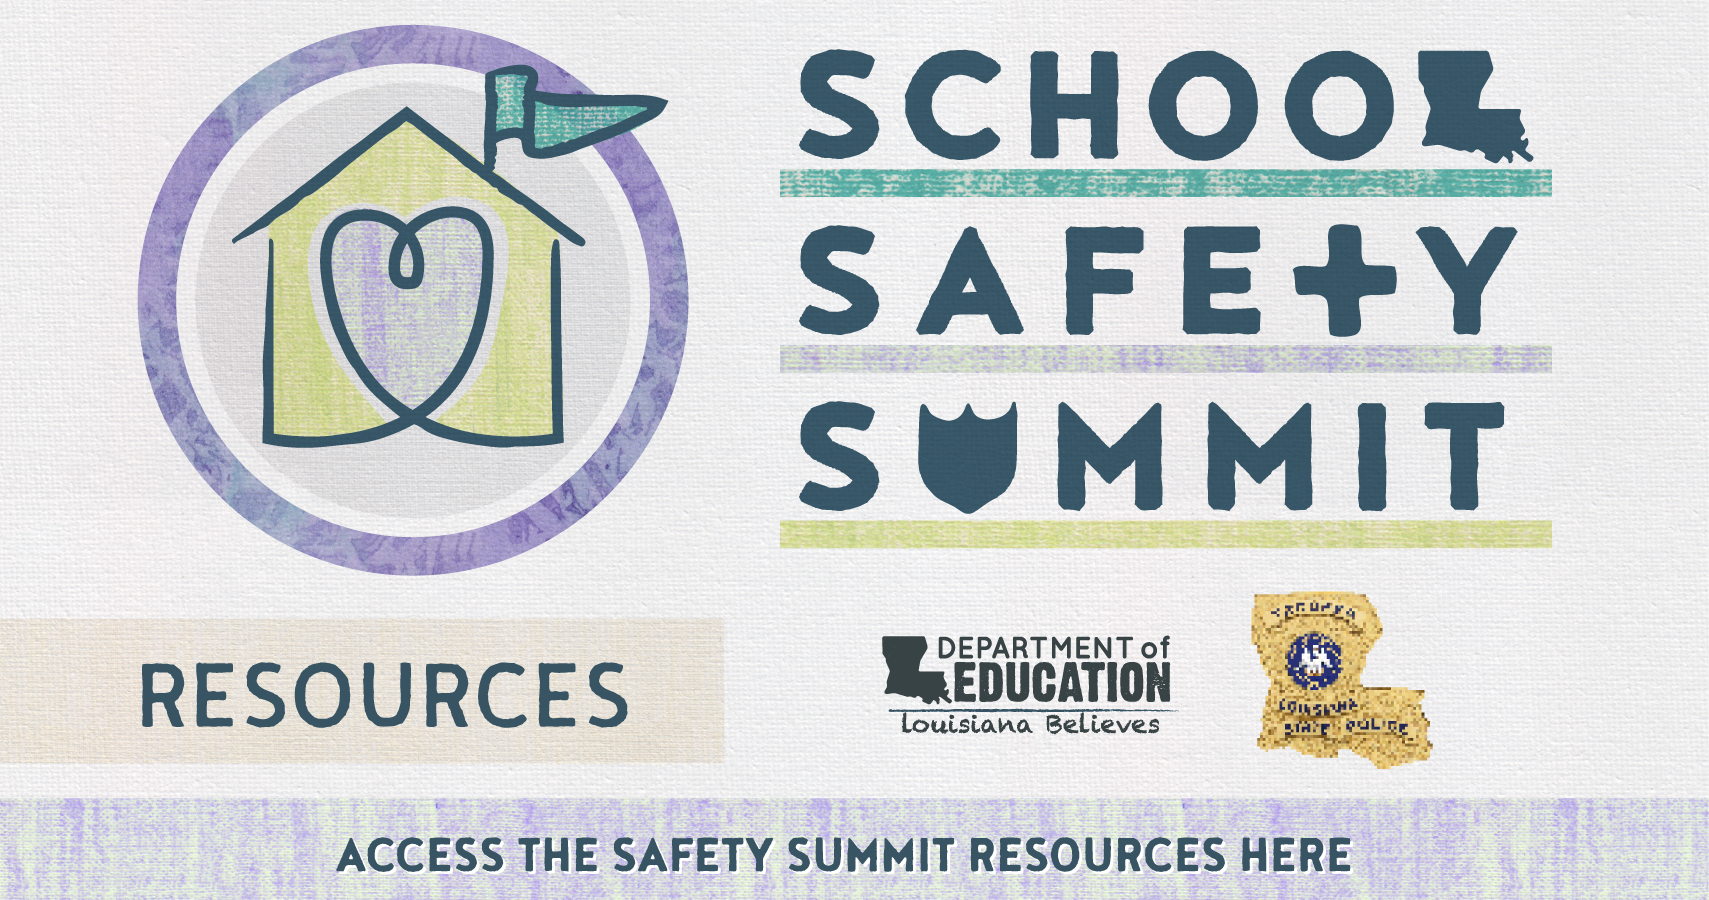 School Safety Summit Resources - Access the School Safety Summit resources here!